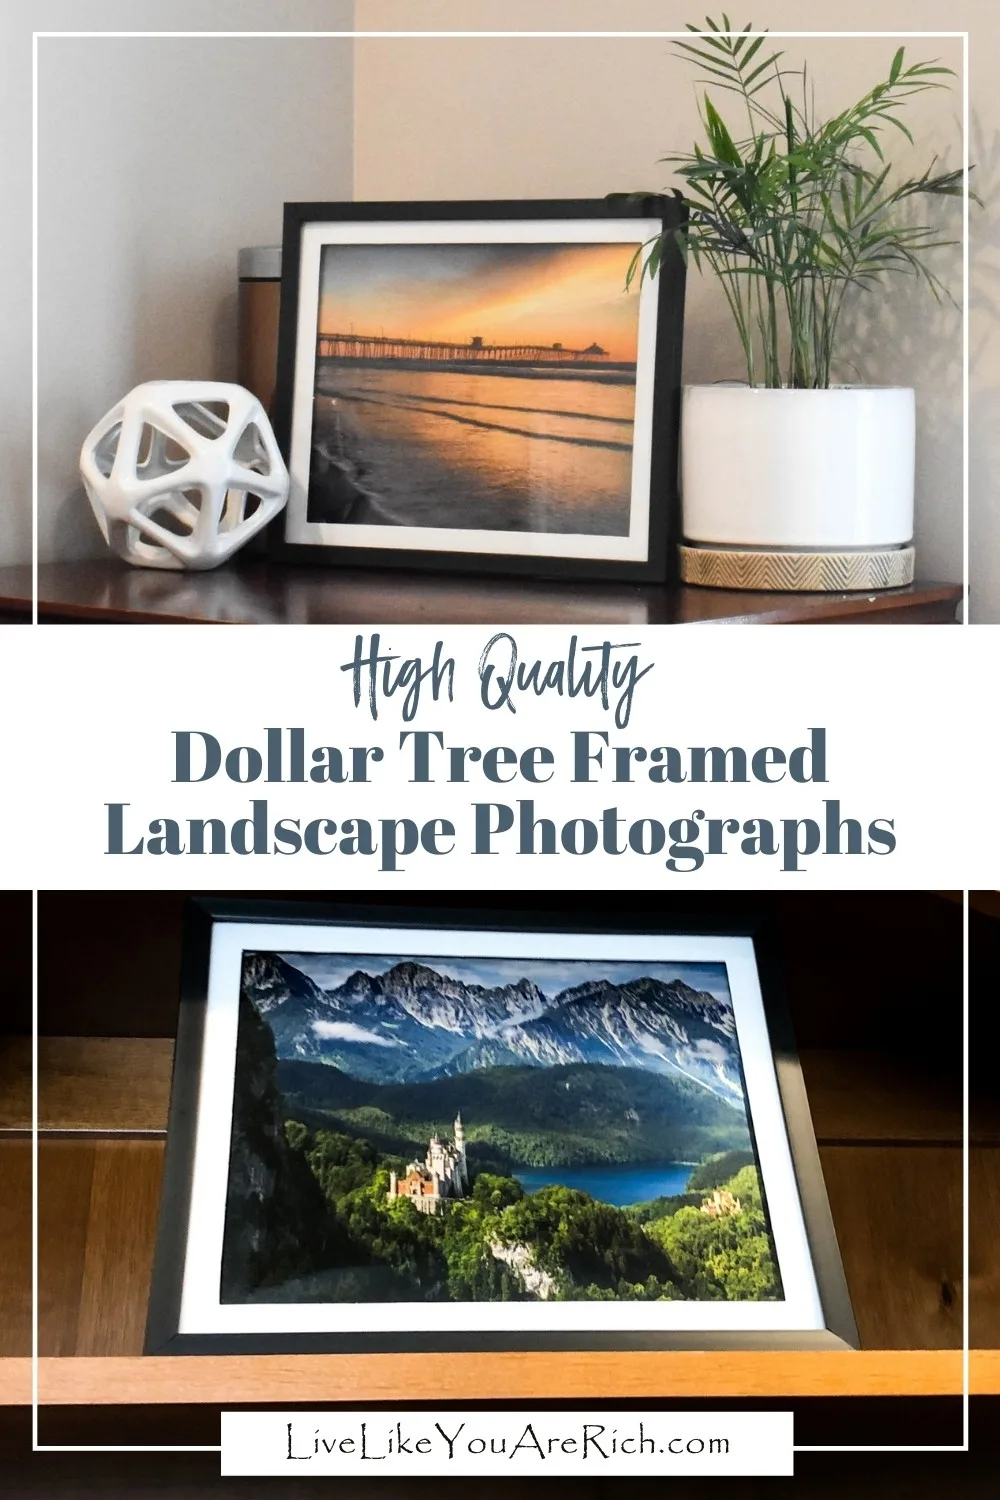 I made these high quality dollar tree framed landscape photographs for $2.50 each. They turned out great and have added beauty and color to my office. When decorating a space that is important to you, or that you will spend a lot of time in, it is nice to have decor that uplifts and brings good feelings or nostalgia.